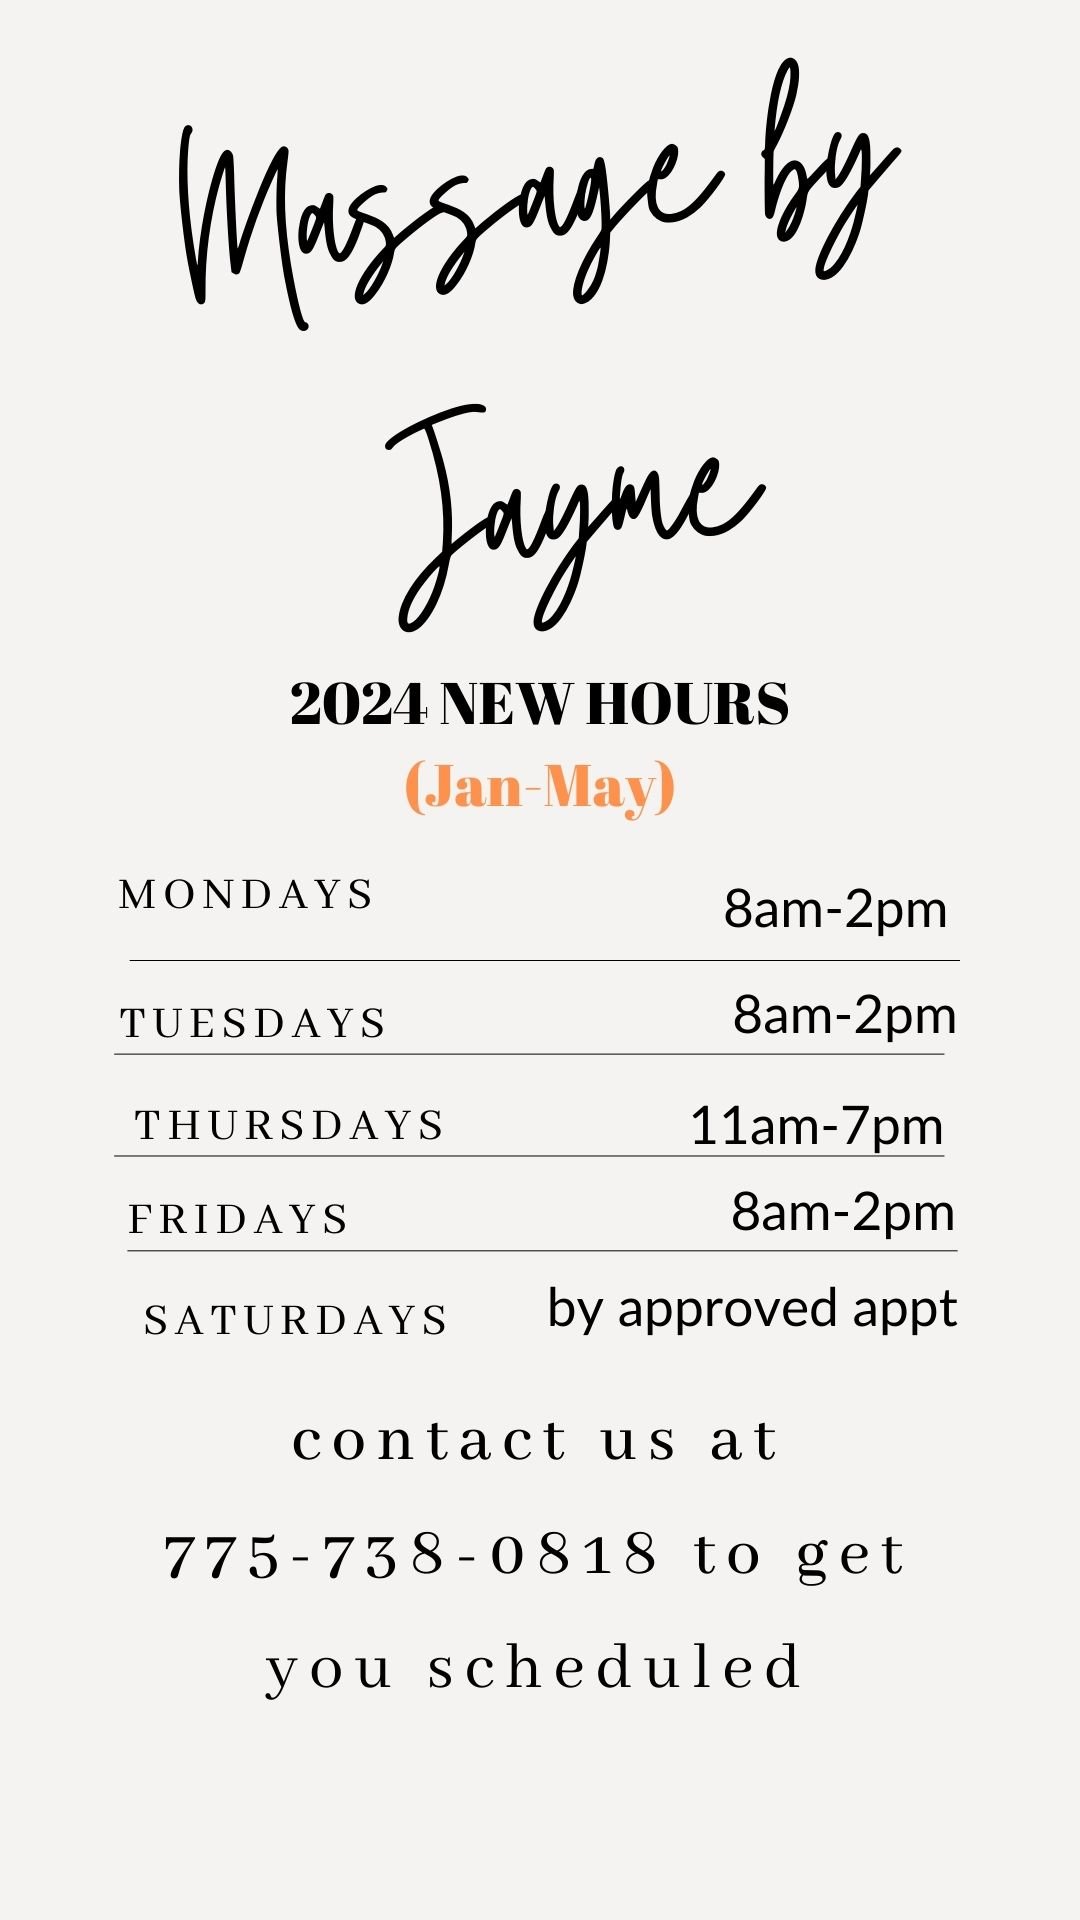 Massage by Jayme 2024 hours.jpg